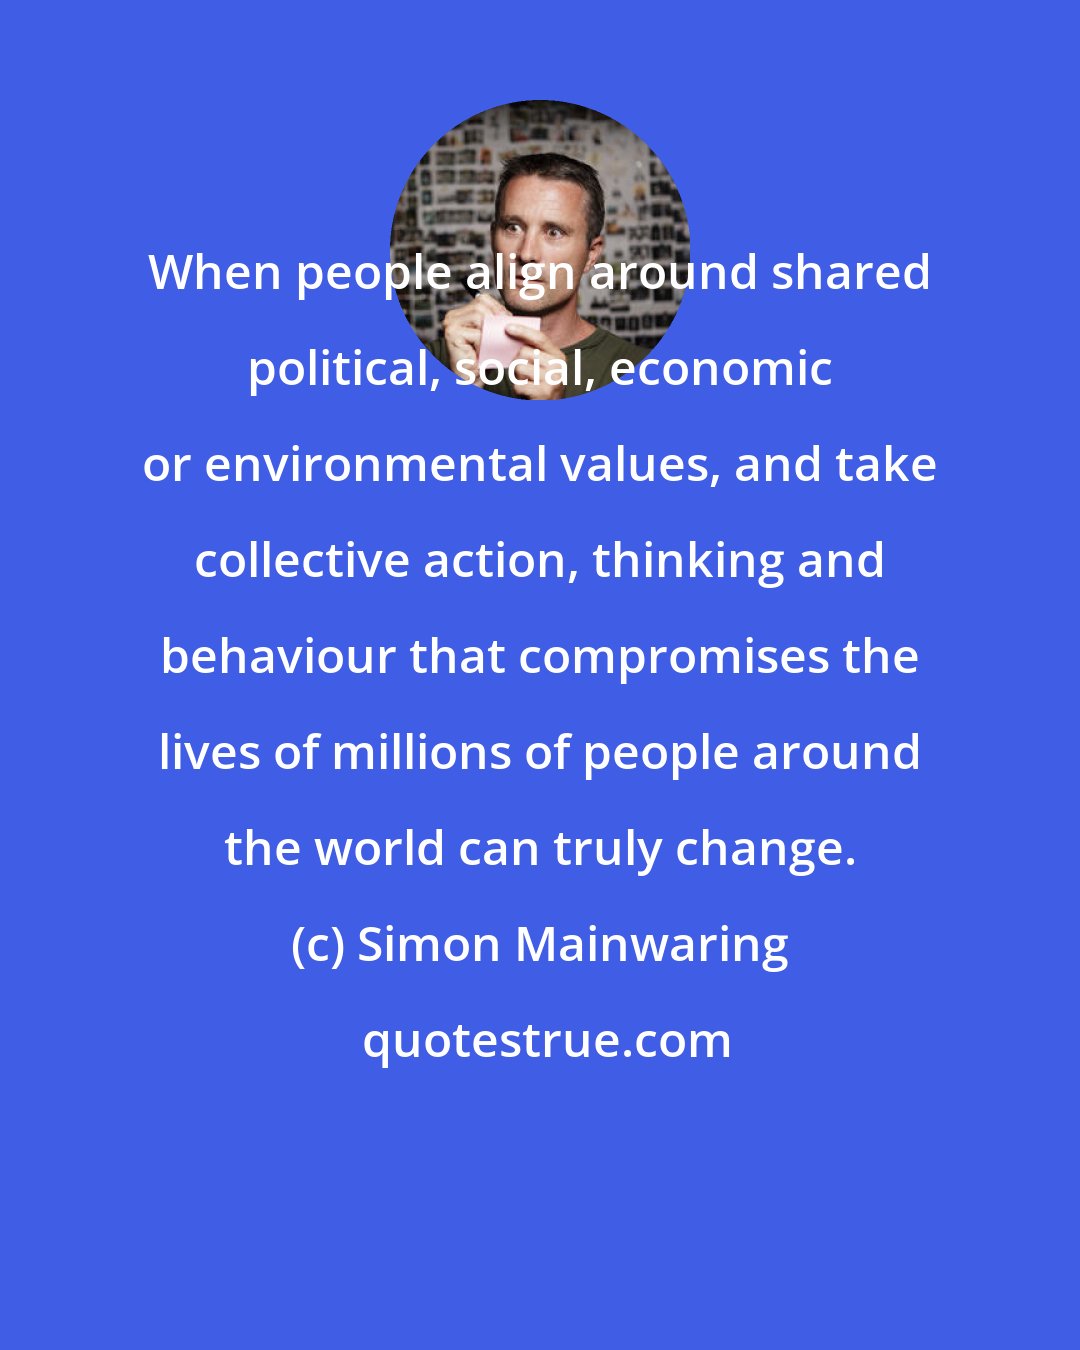 Simon Mainwaring: When people align around shared political, social, economic or environmental values, and take collective action, thinking and behaviour that compromises the lives of millions of people around the world can truly change.